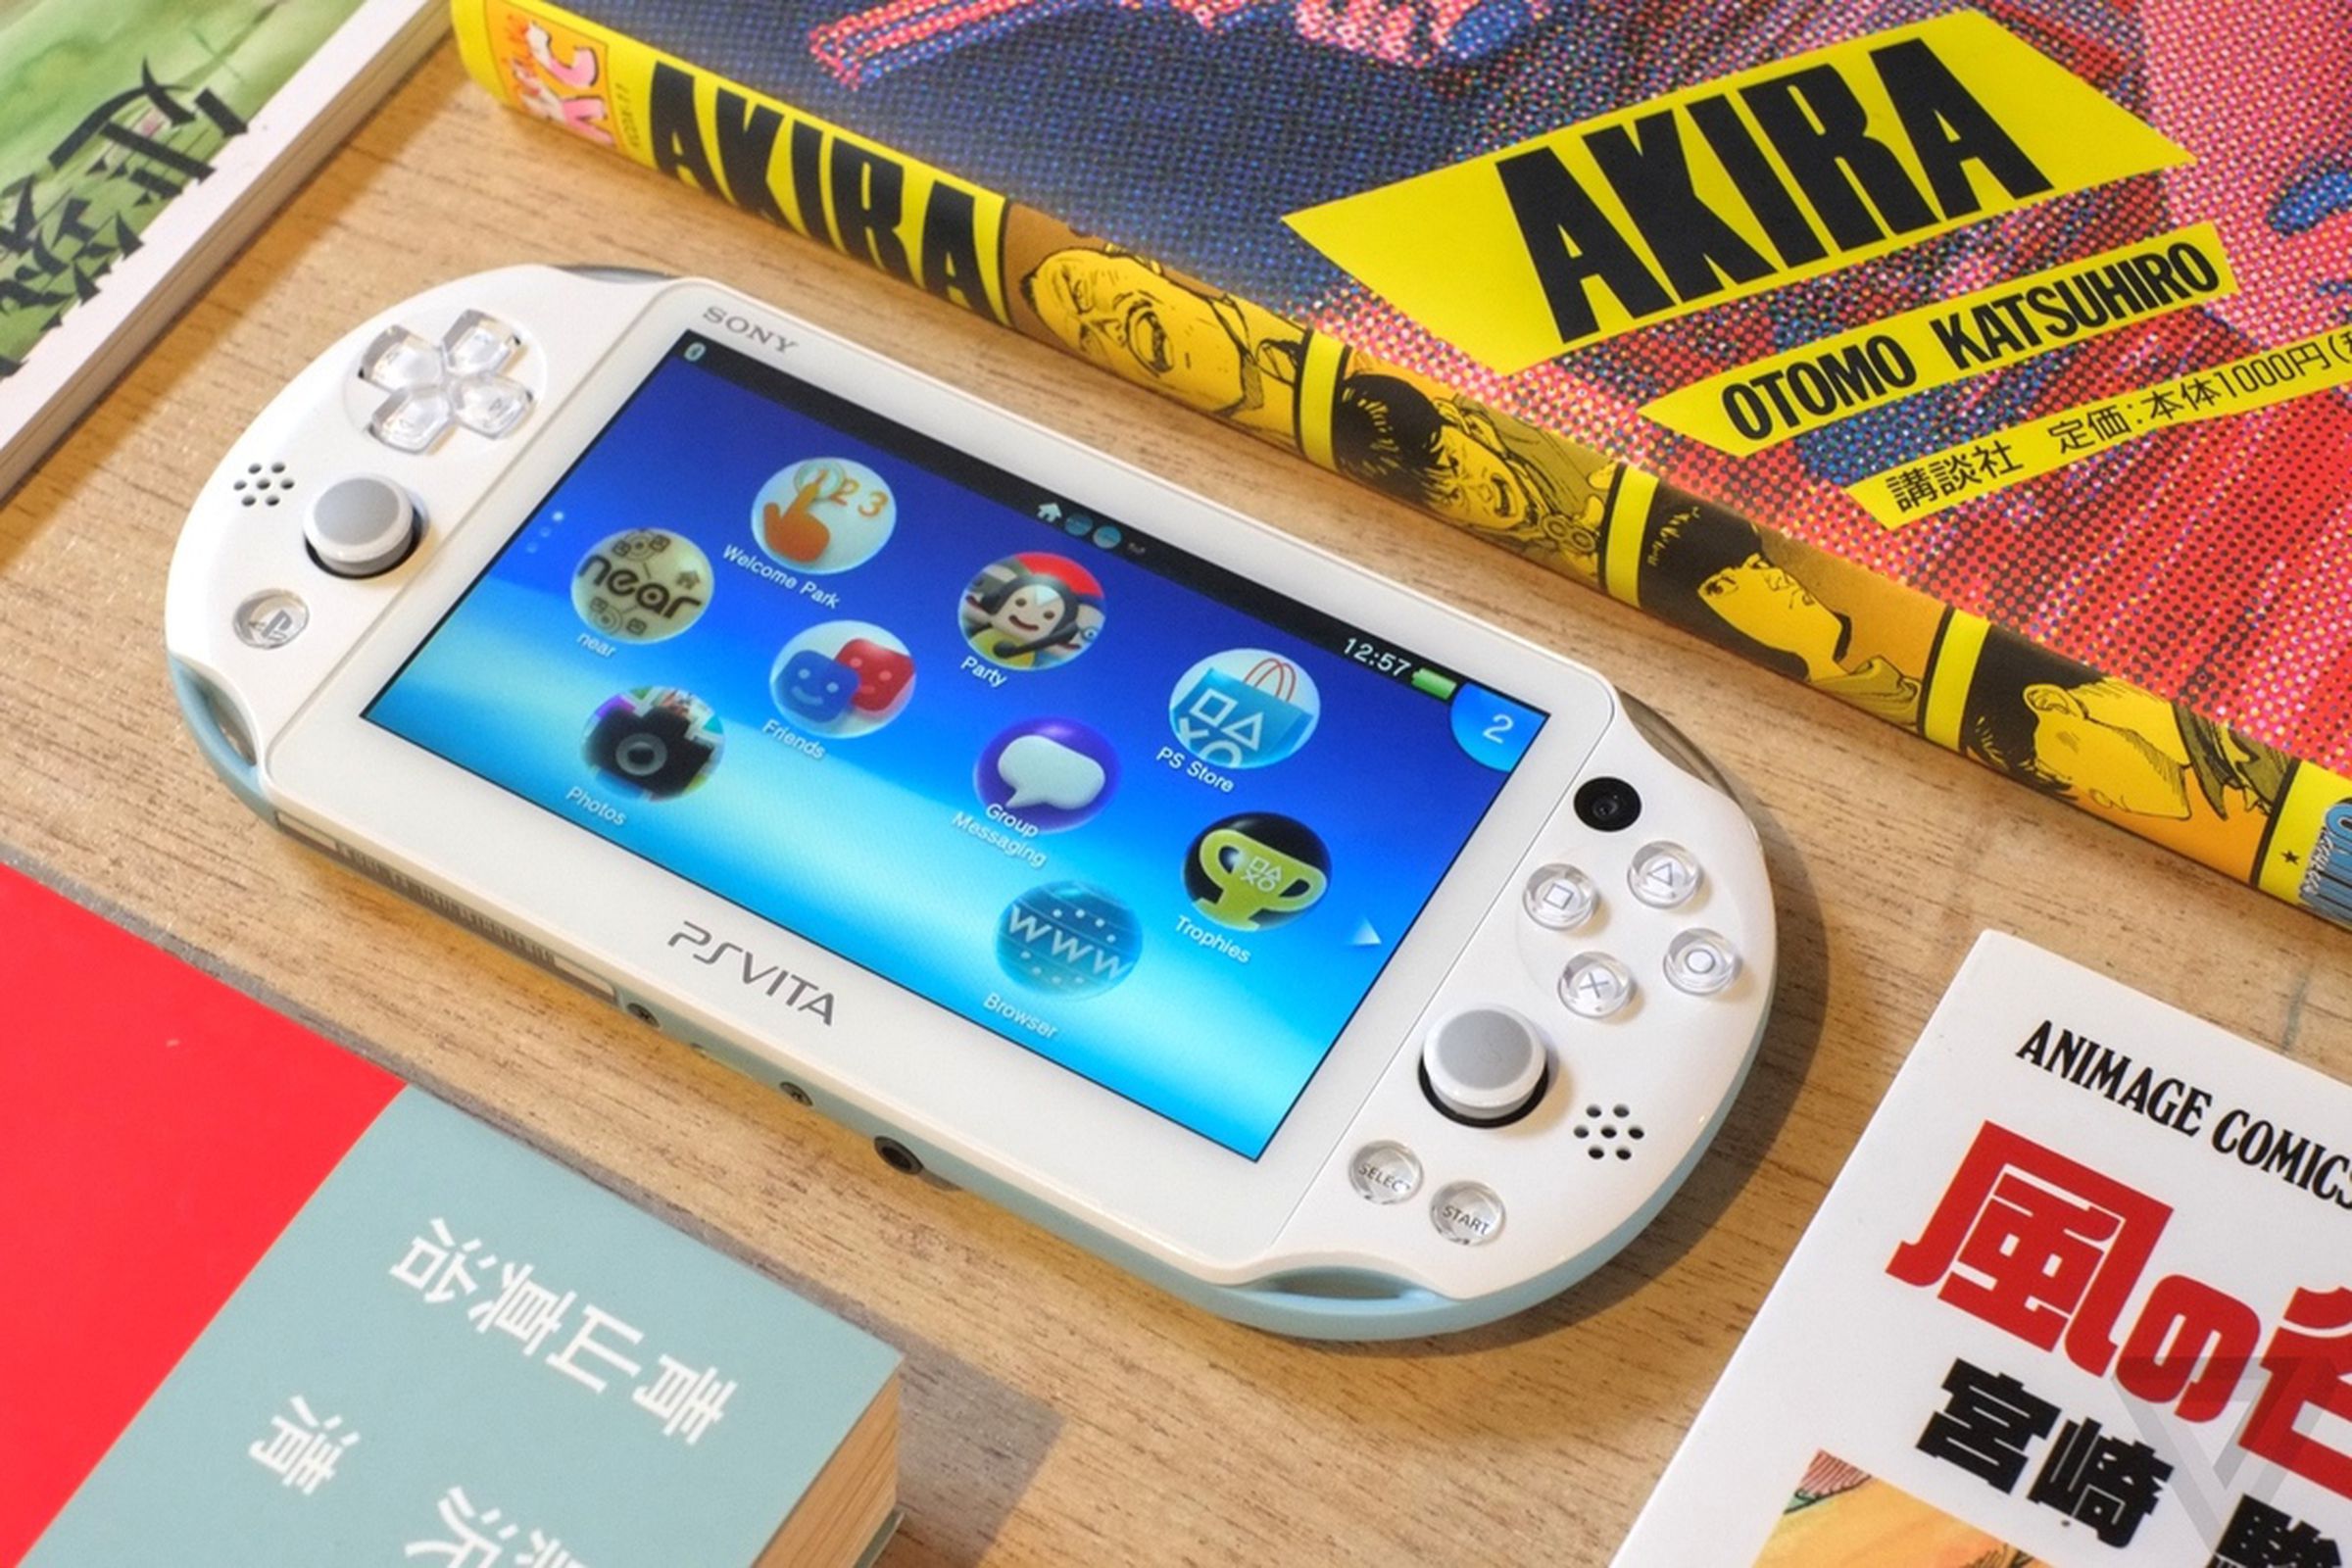 The PS Vita sitting on a table, nested between an Akira manga and several other books.